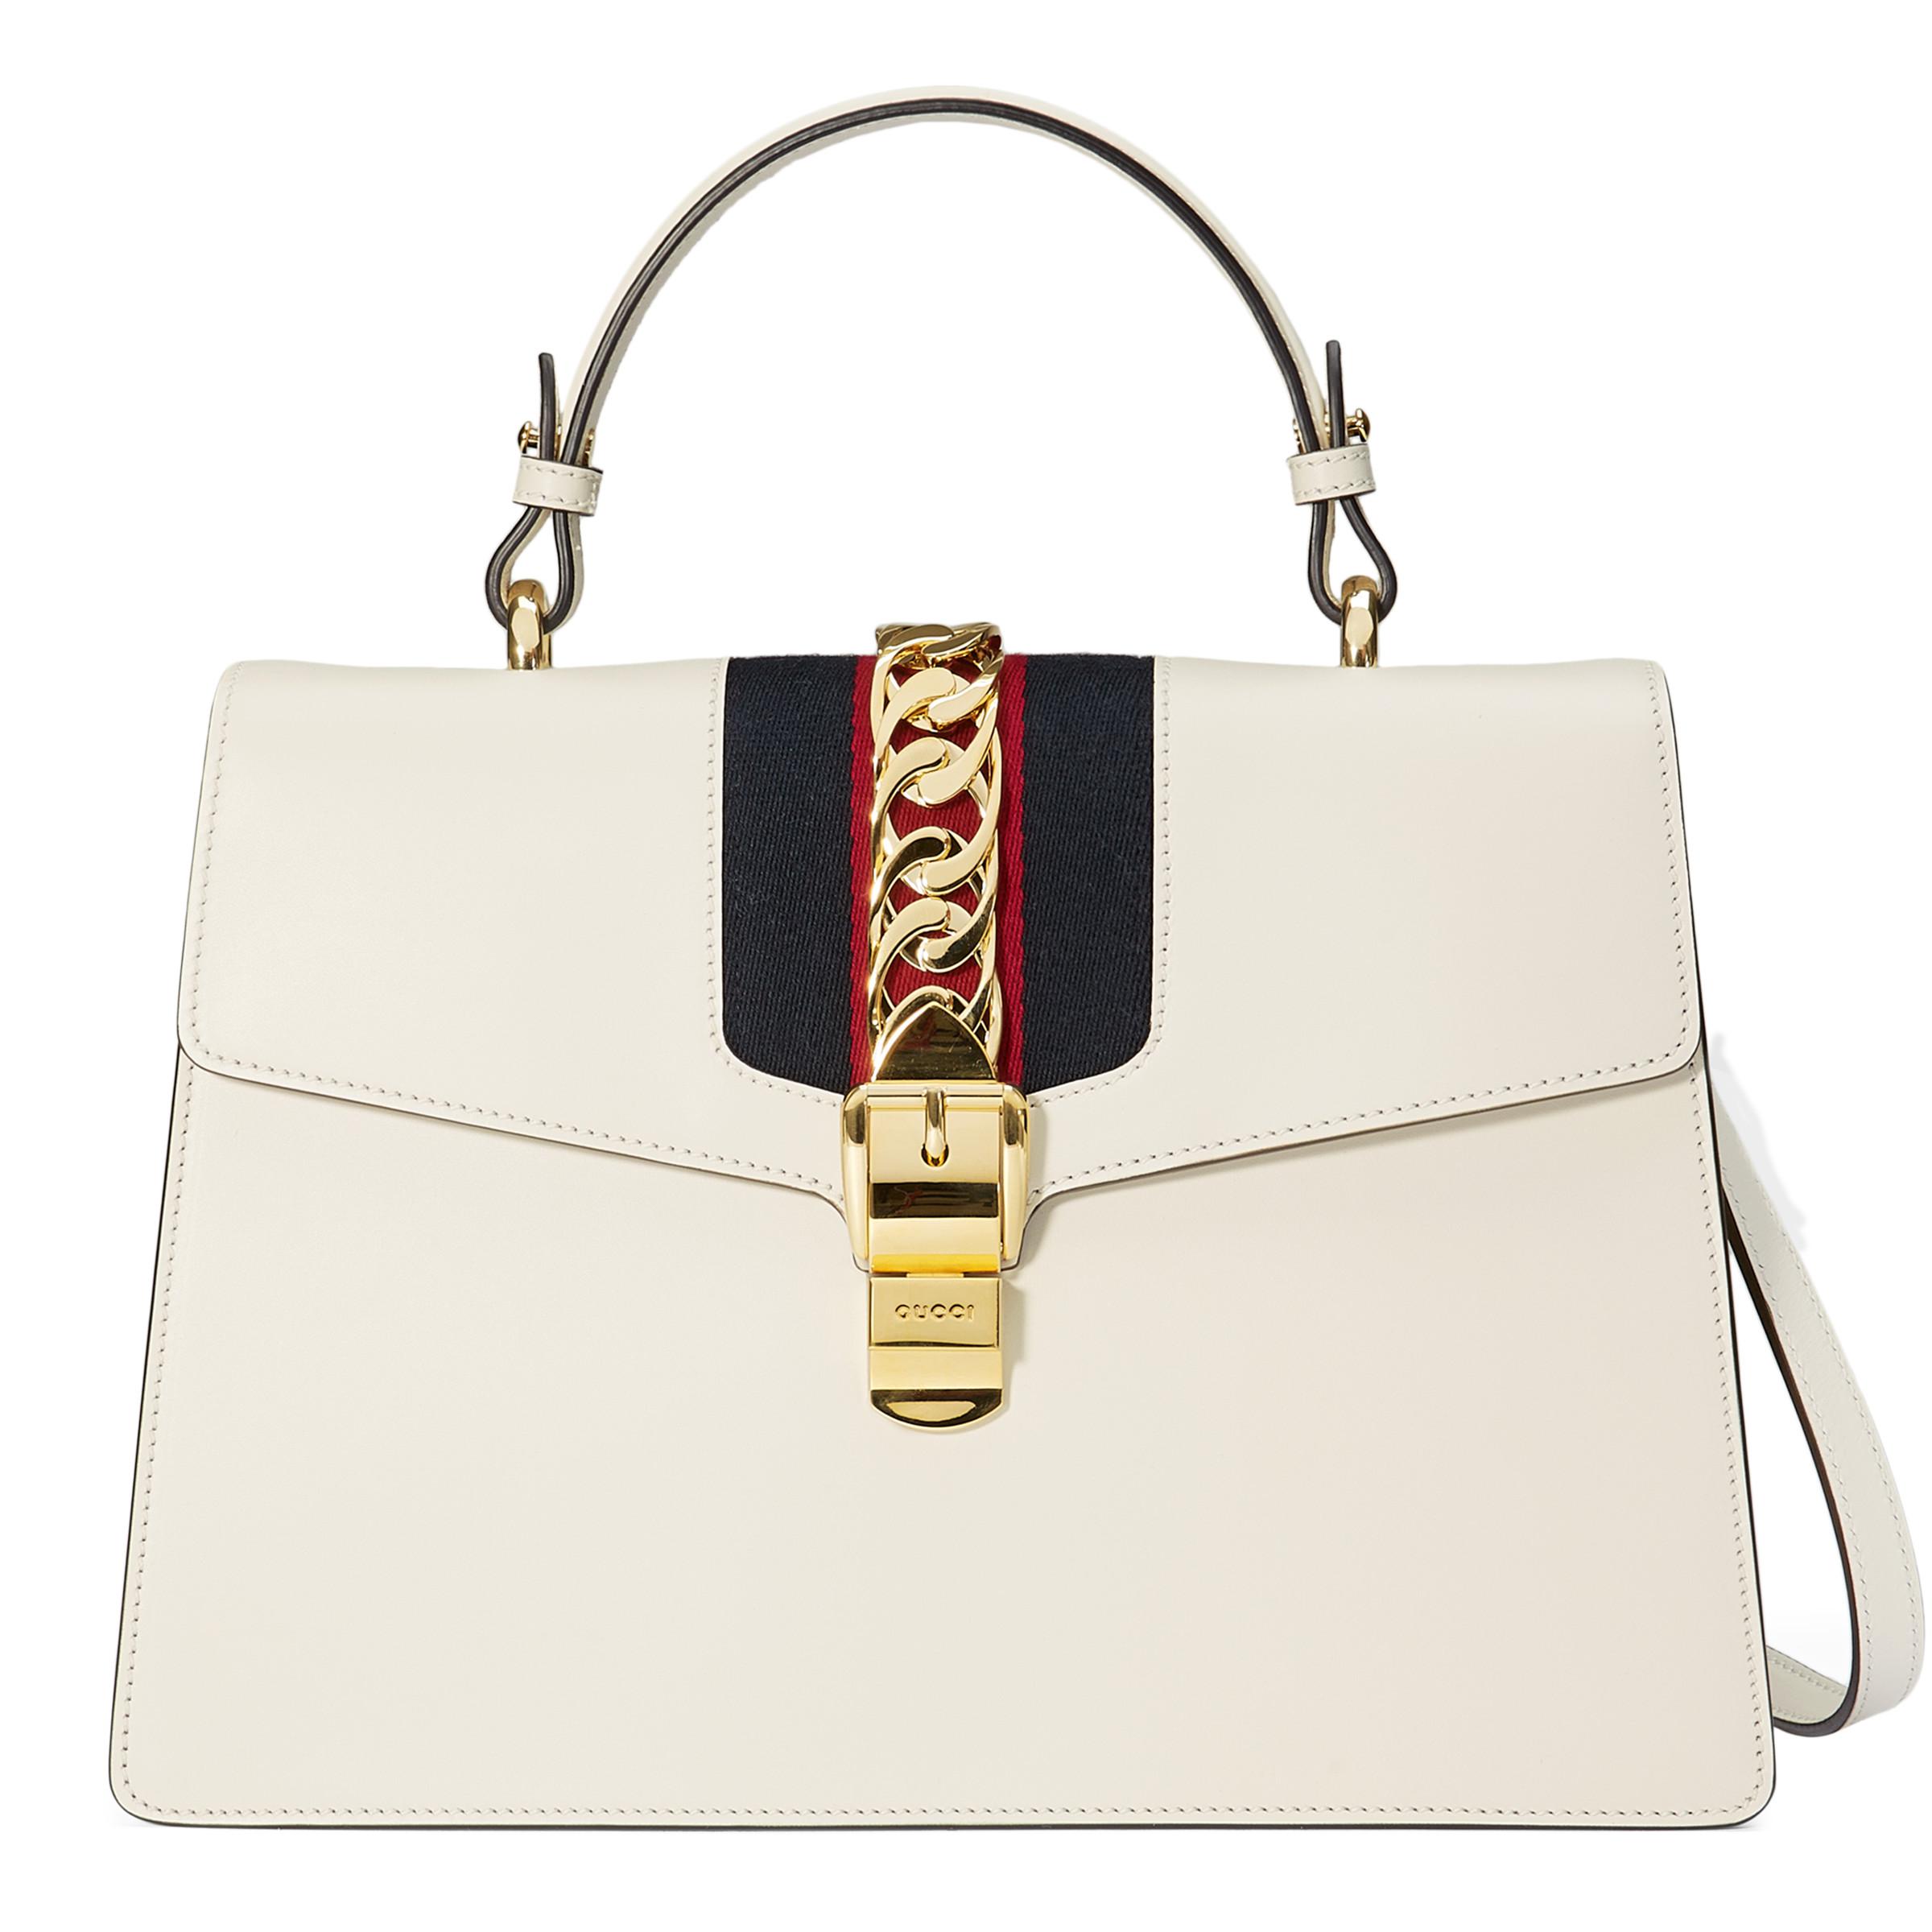 Gucci Leather Sylvie Medium Top Handle Bag in White Leather (White) - Lyst